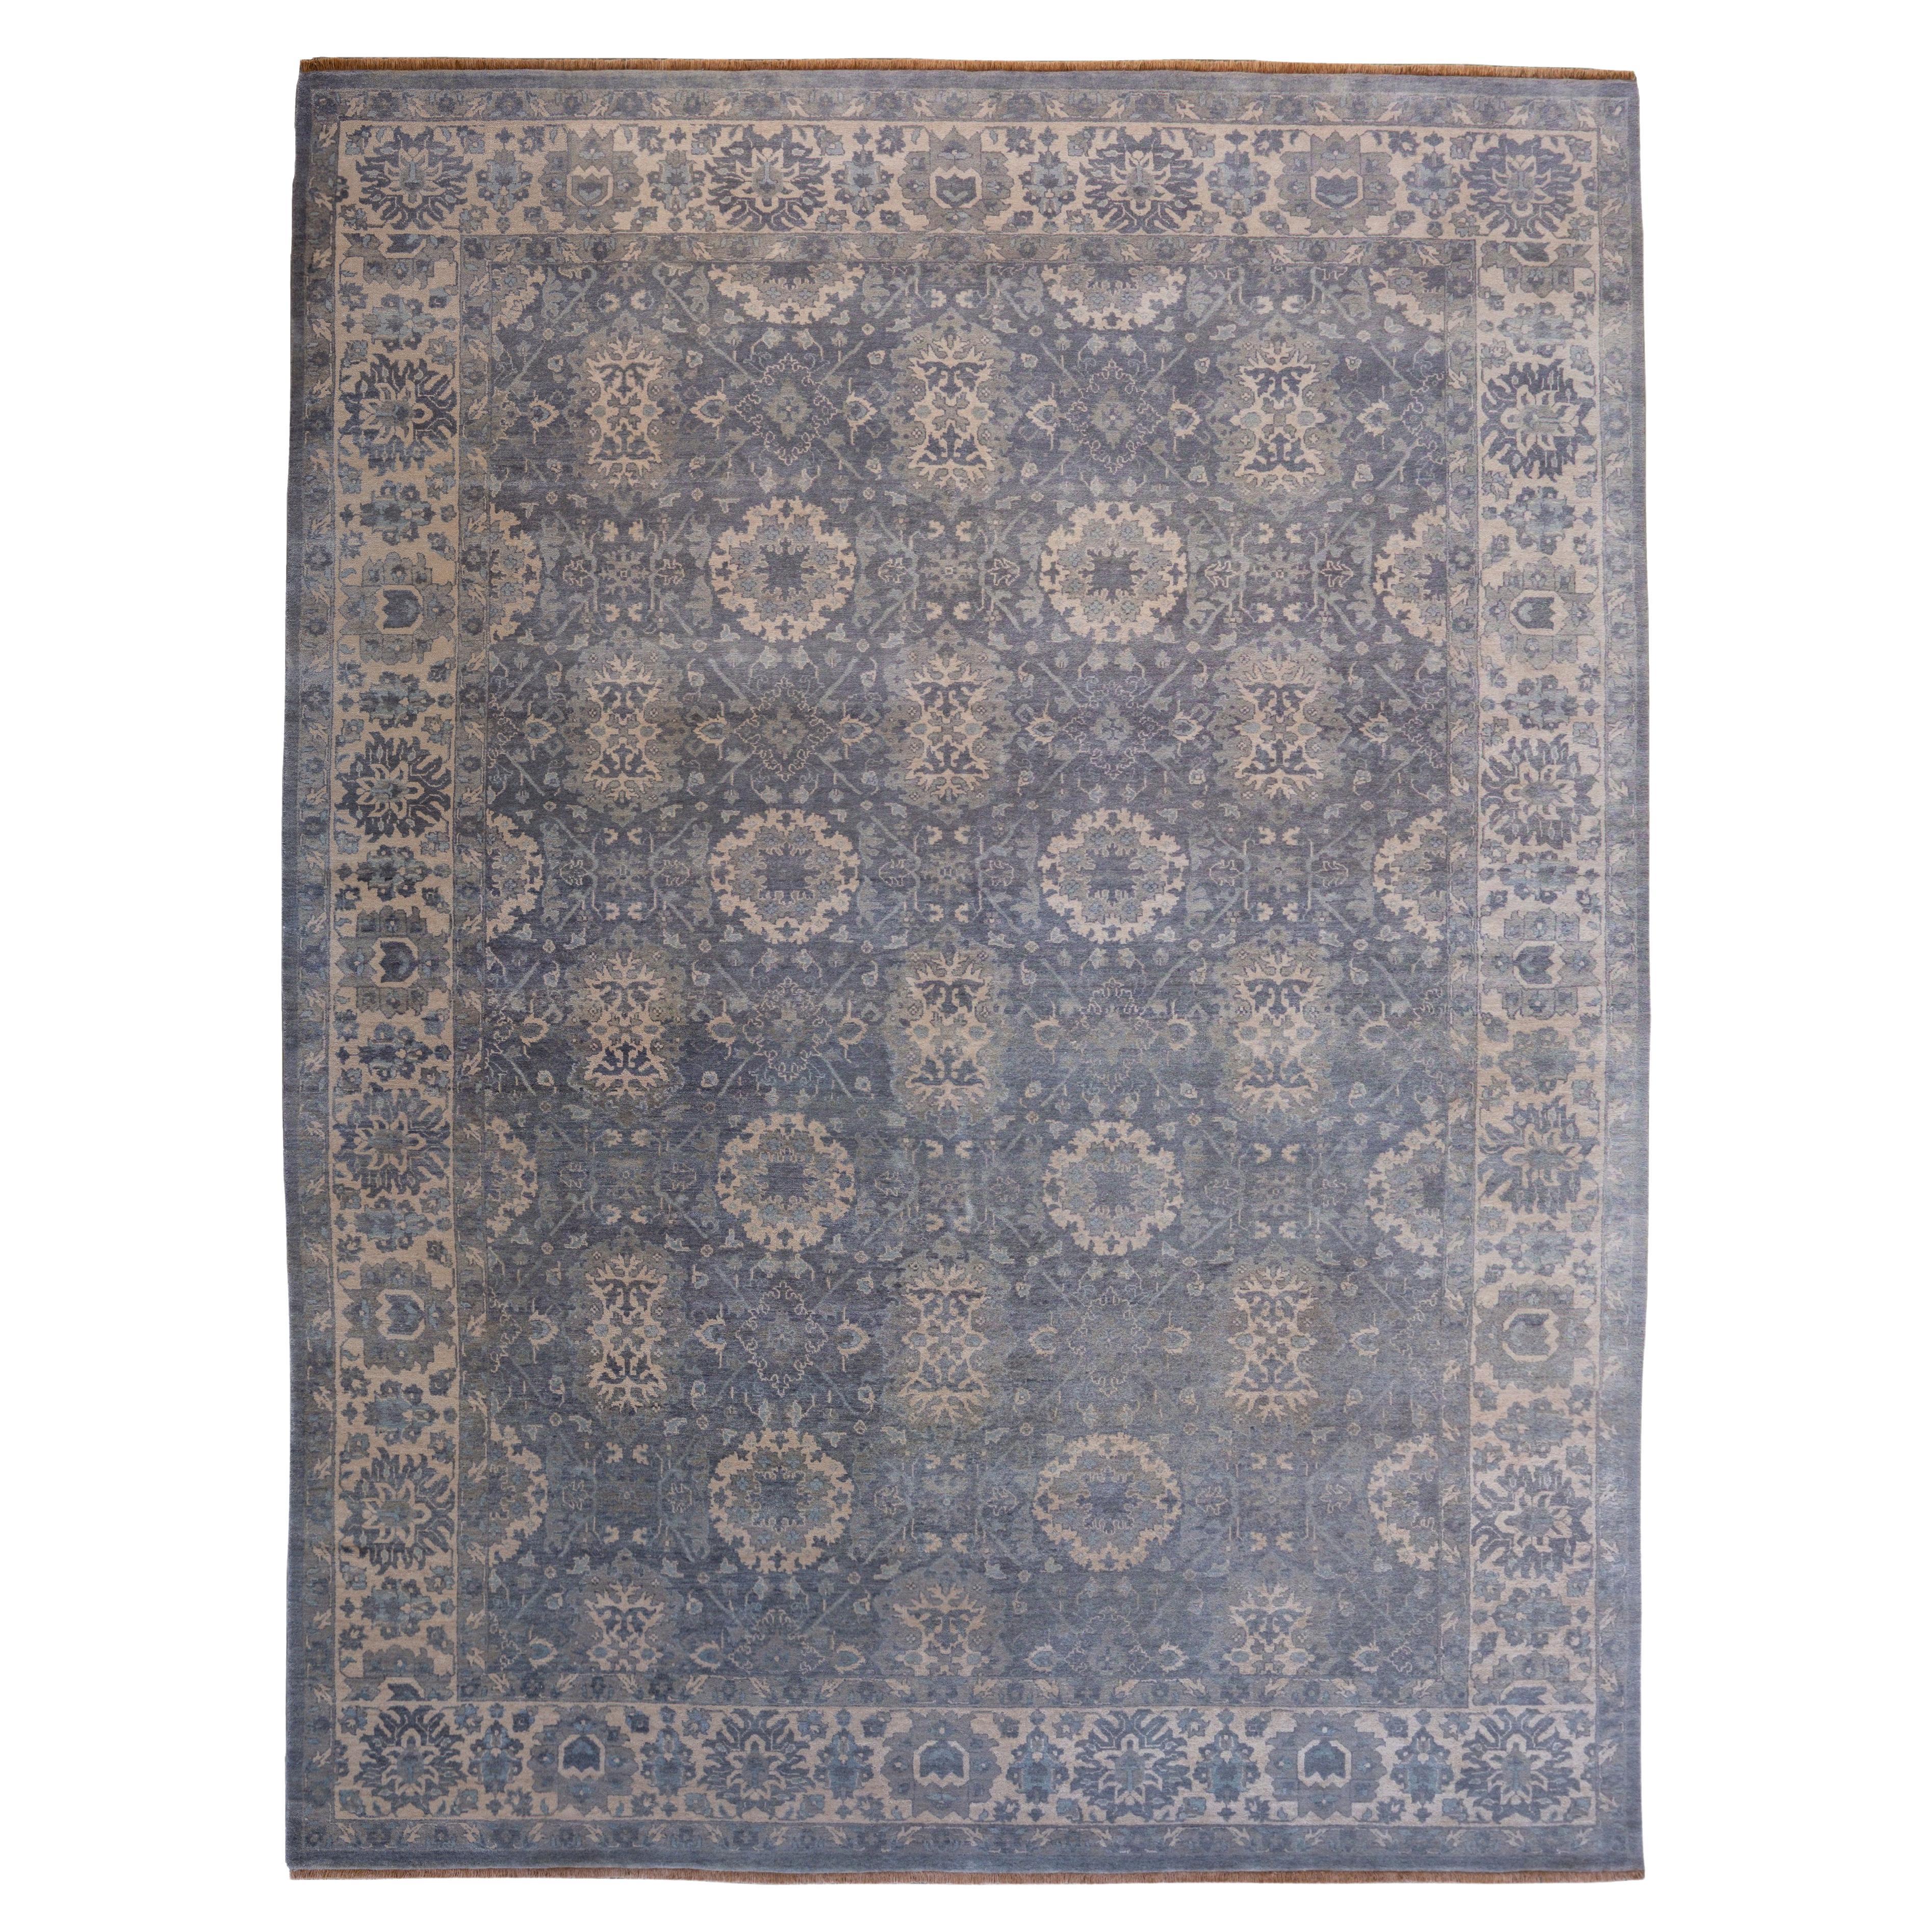 Modern Grey Hand-Knotted Wool Persian Carpet, 9' x 12'